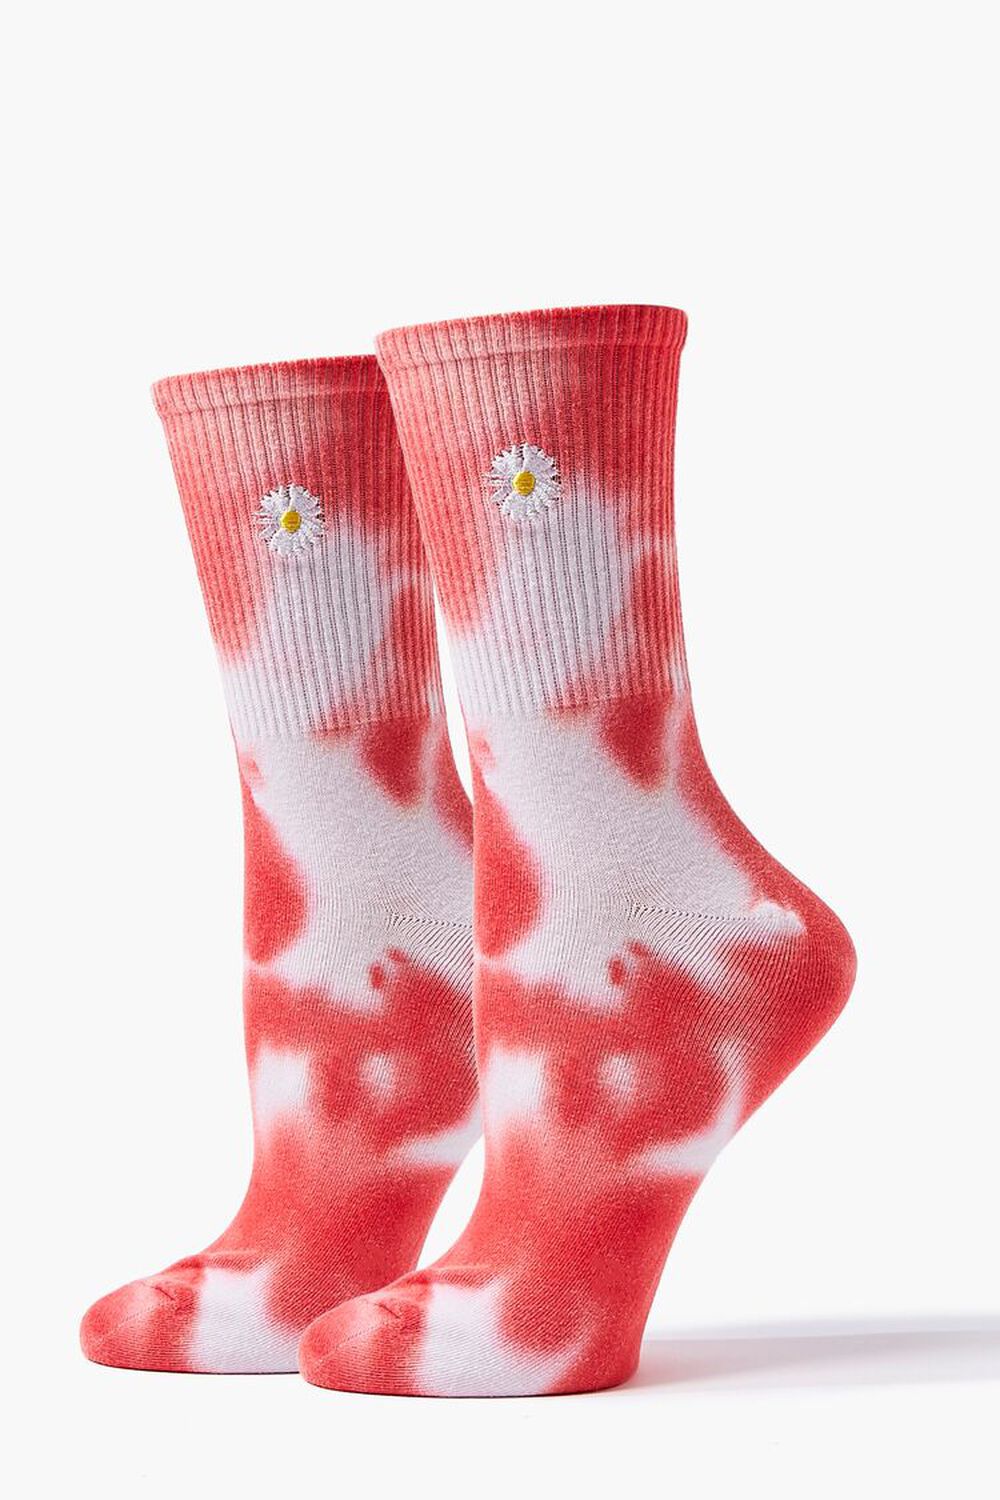 RED/MULTI Daisy Embroidered Graphic Crew Socks, image 1